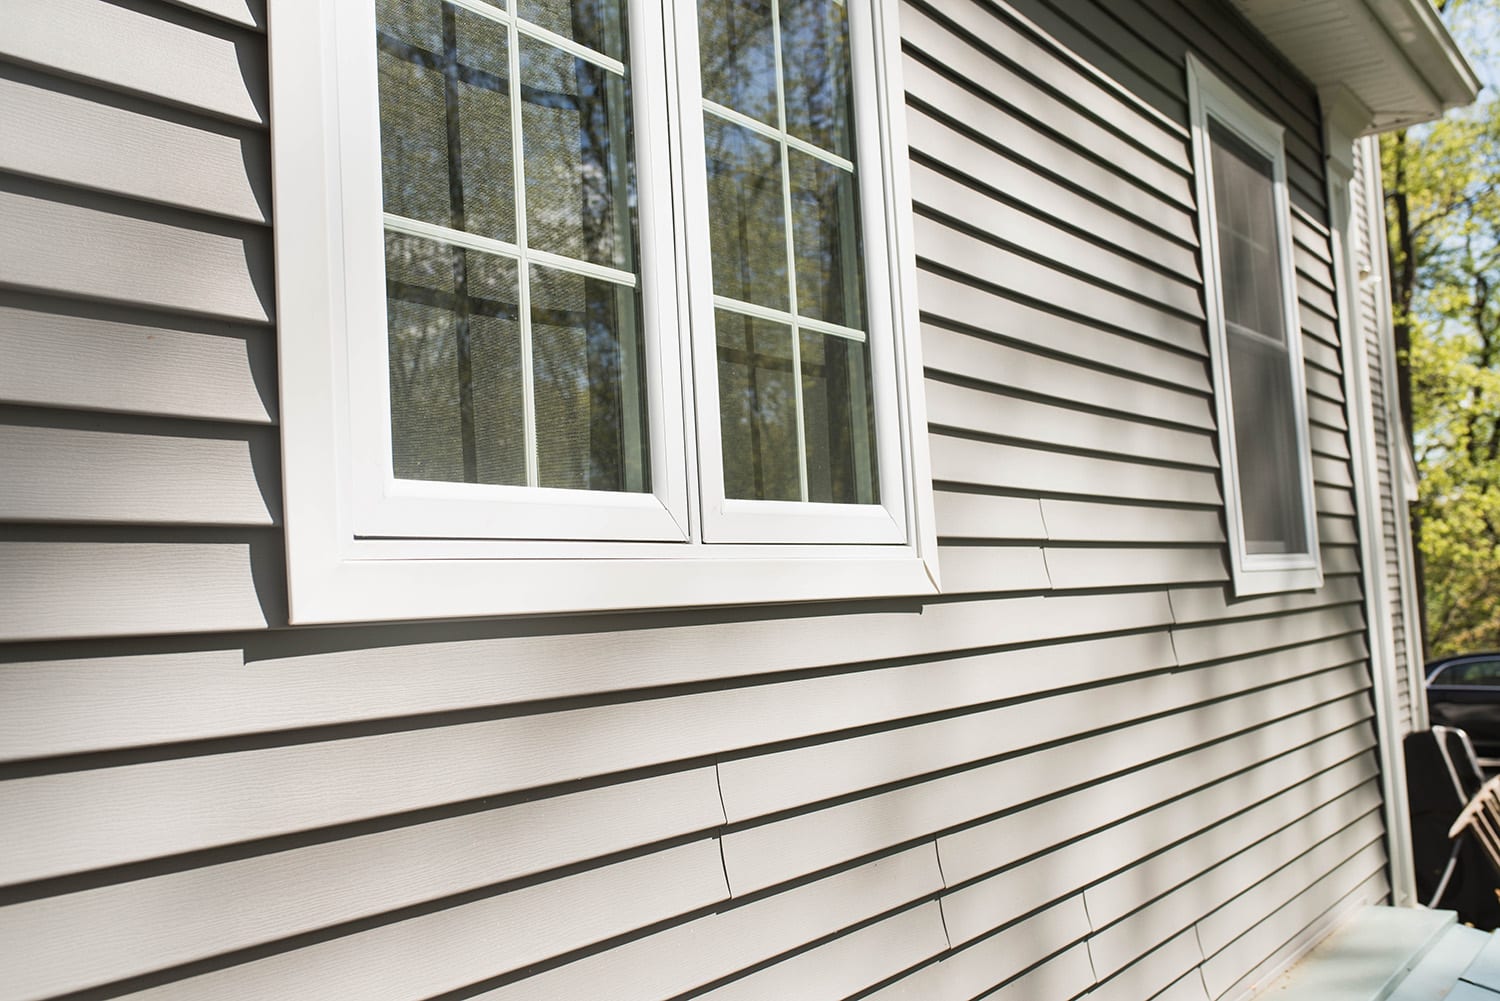 The Paint People shares tips on how you can paint vinyl siding